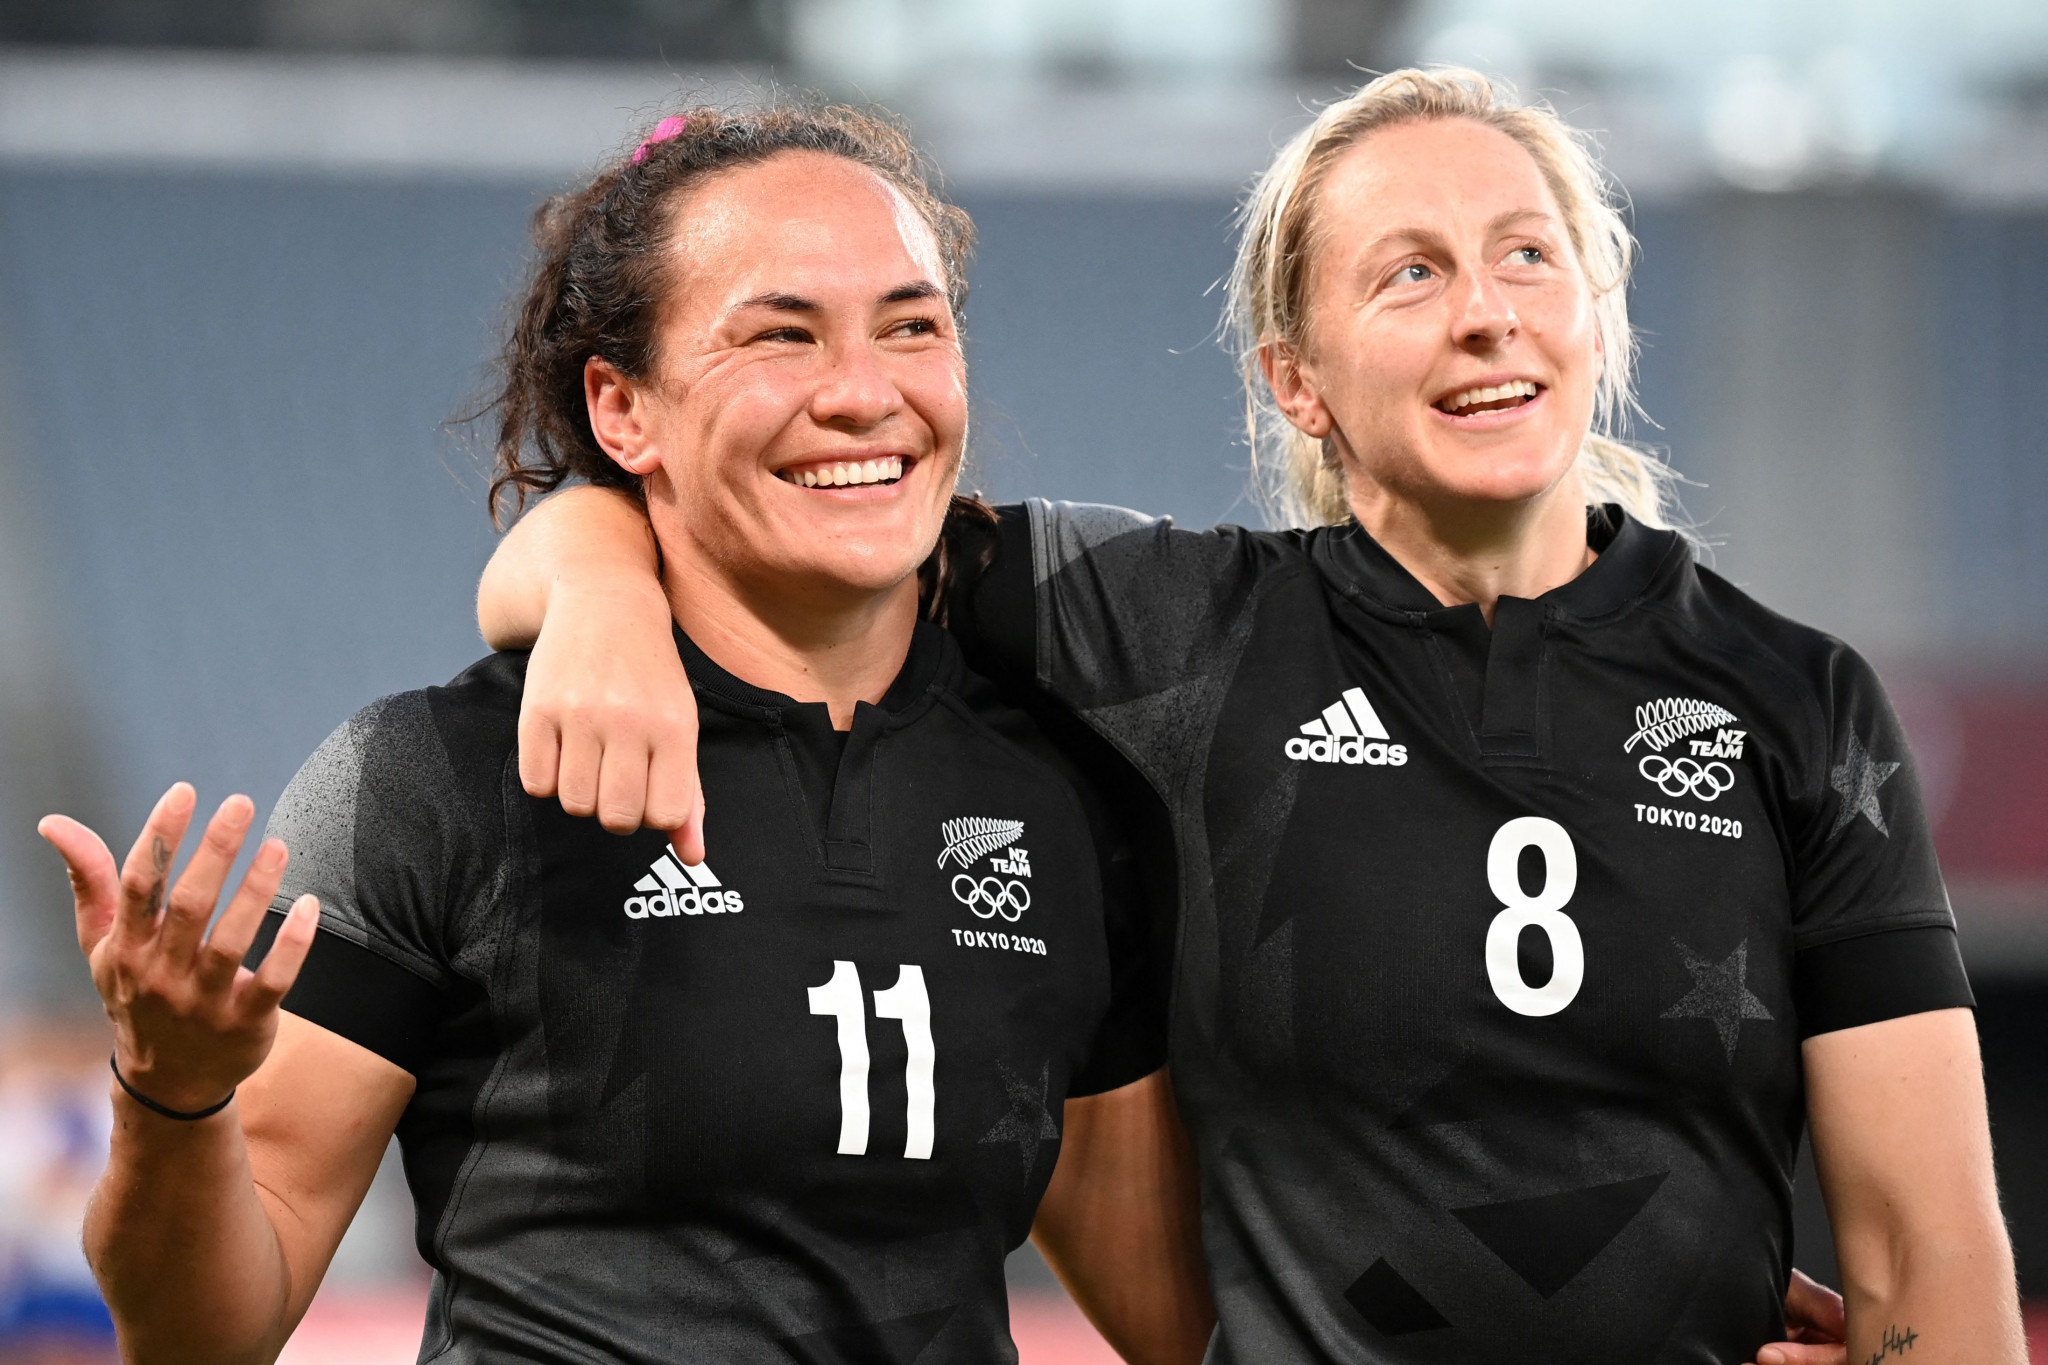 New Zealand's women's rugby sevens players Portia Woodman, left, and Kelly Brazier, right, are among the 40 out athletes listed as competing at Birmingham 2022 ©Getty Images